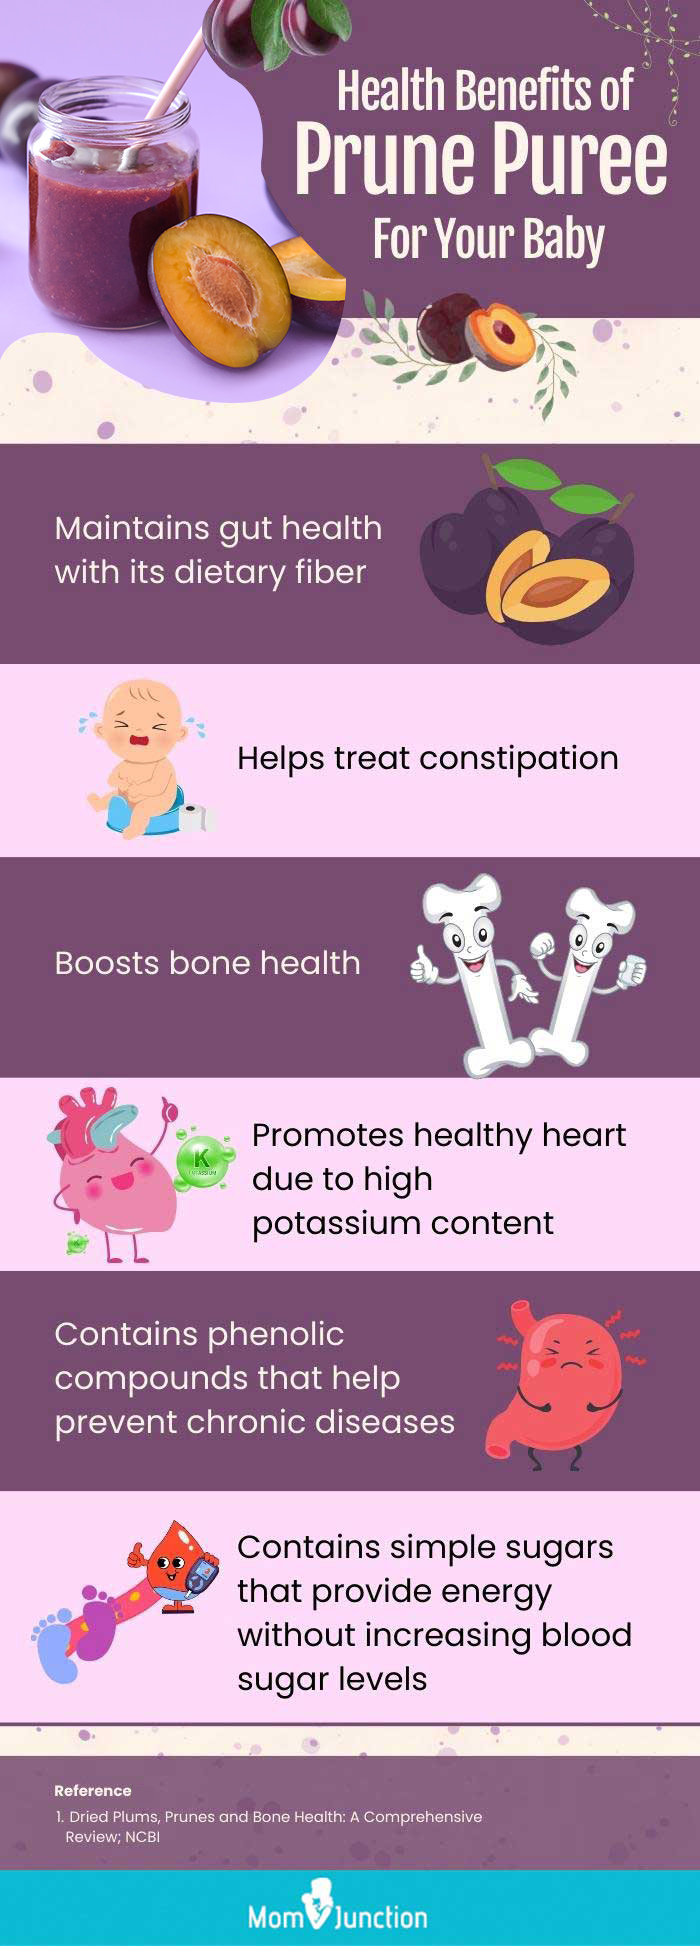 health benefits of prune puree for your baby (infographic)